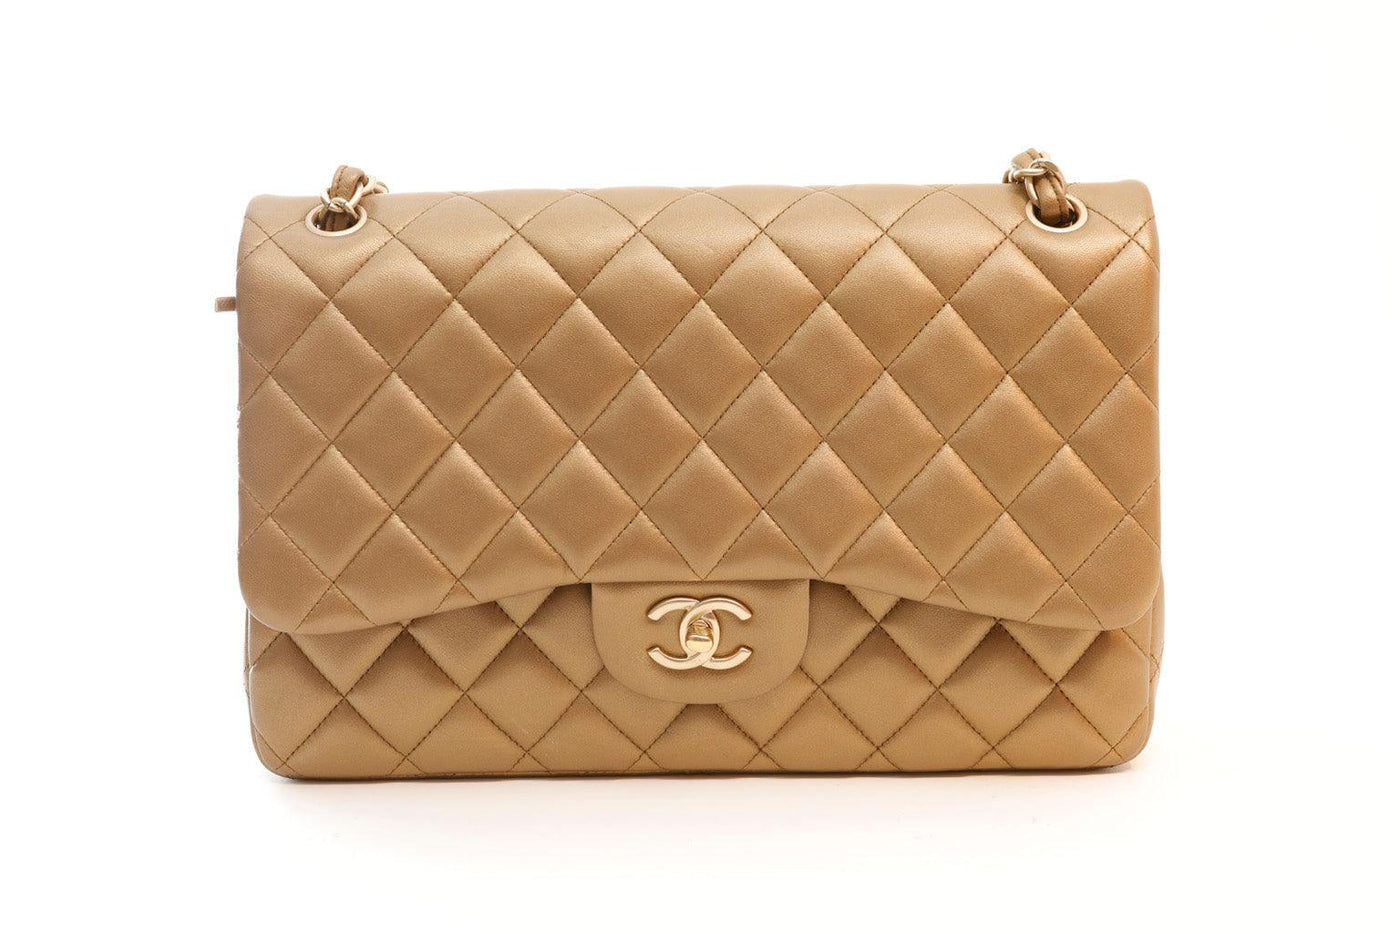 Chanel Bronze Quilted Caviar Leather Jumbo Classic Double Flap Bag Chanel